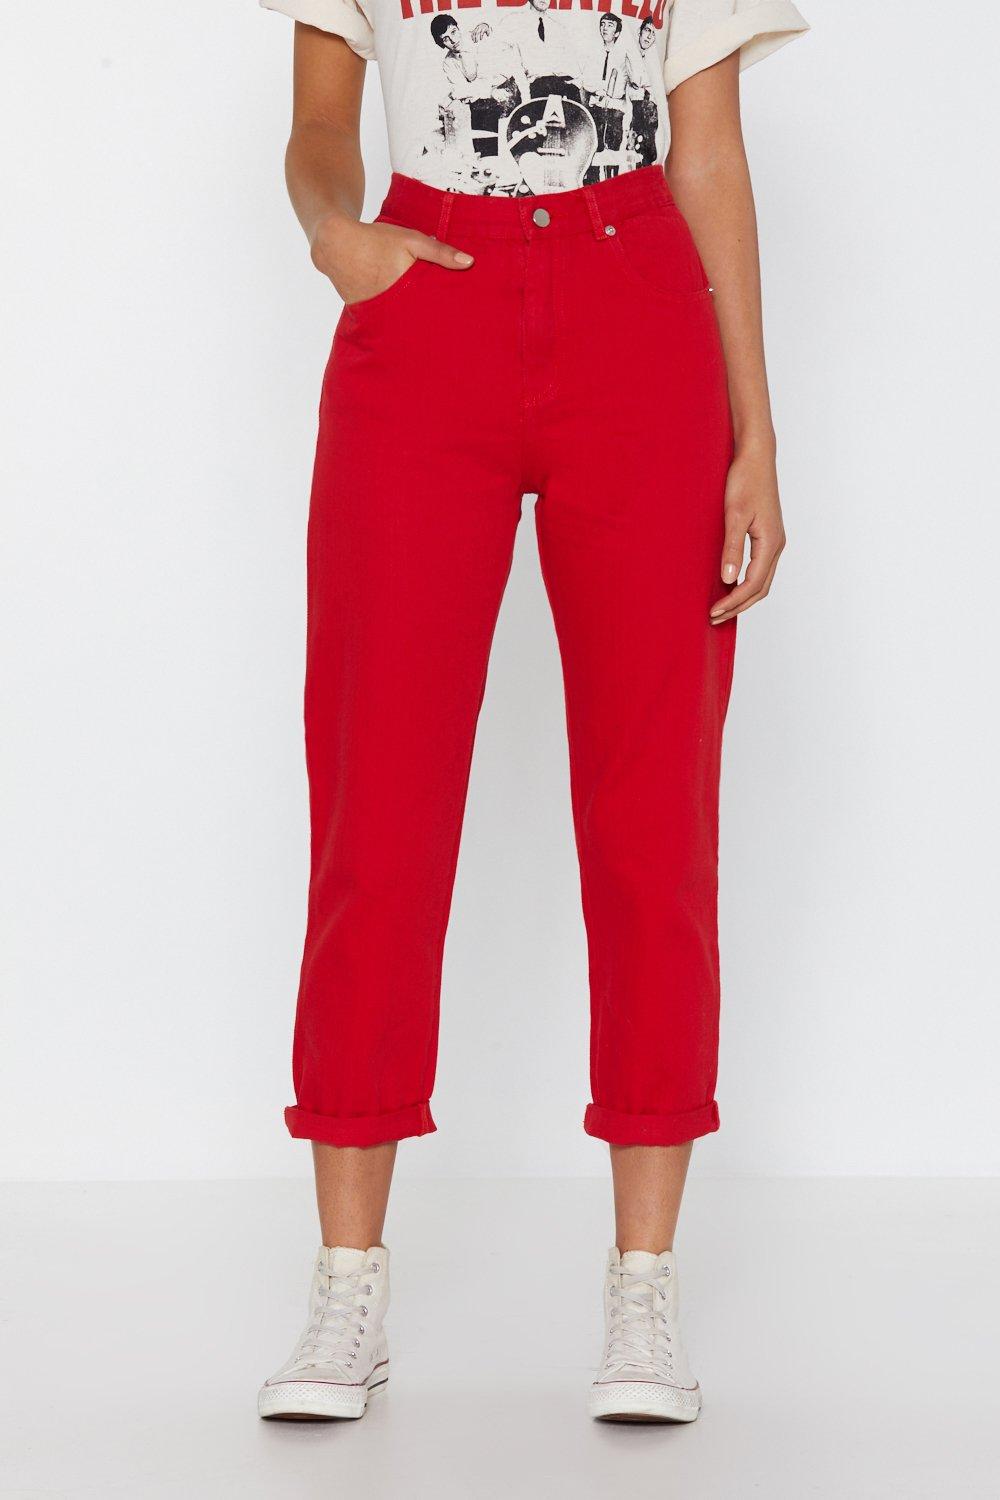 red high waisted jeans